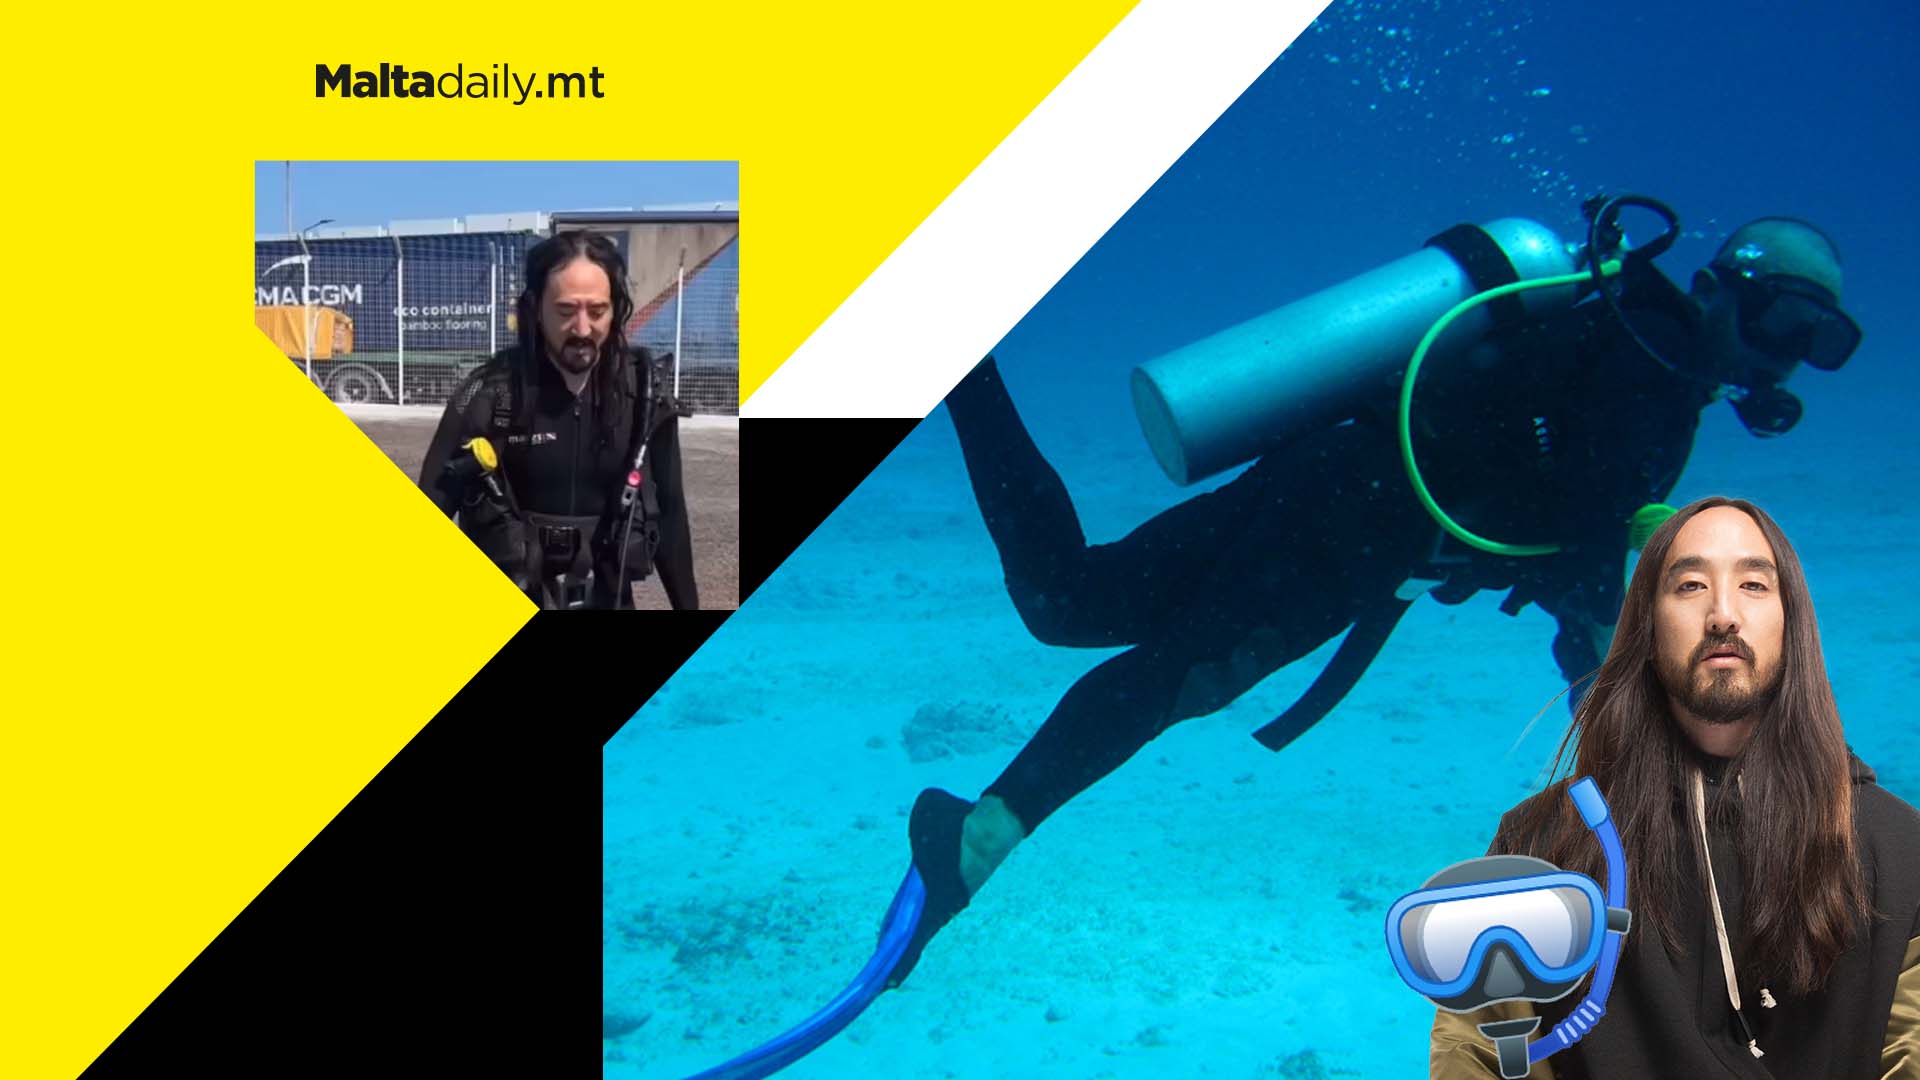 Steve Aoki goes diving in Malta and absolutely loves it